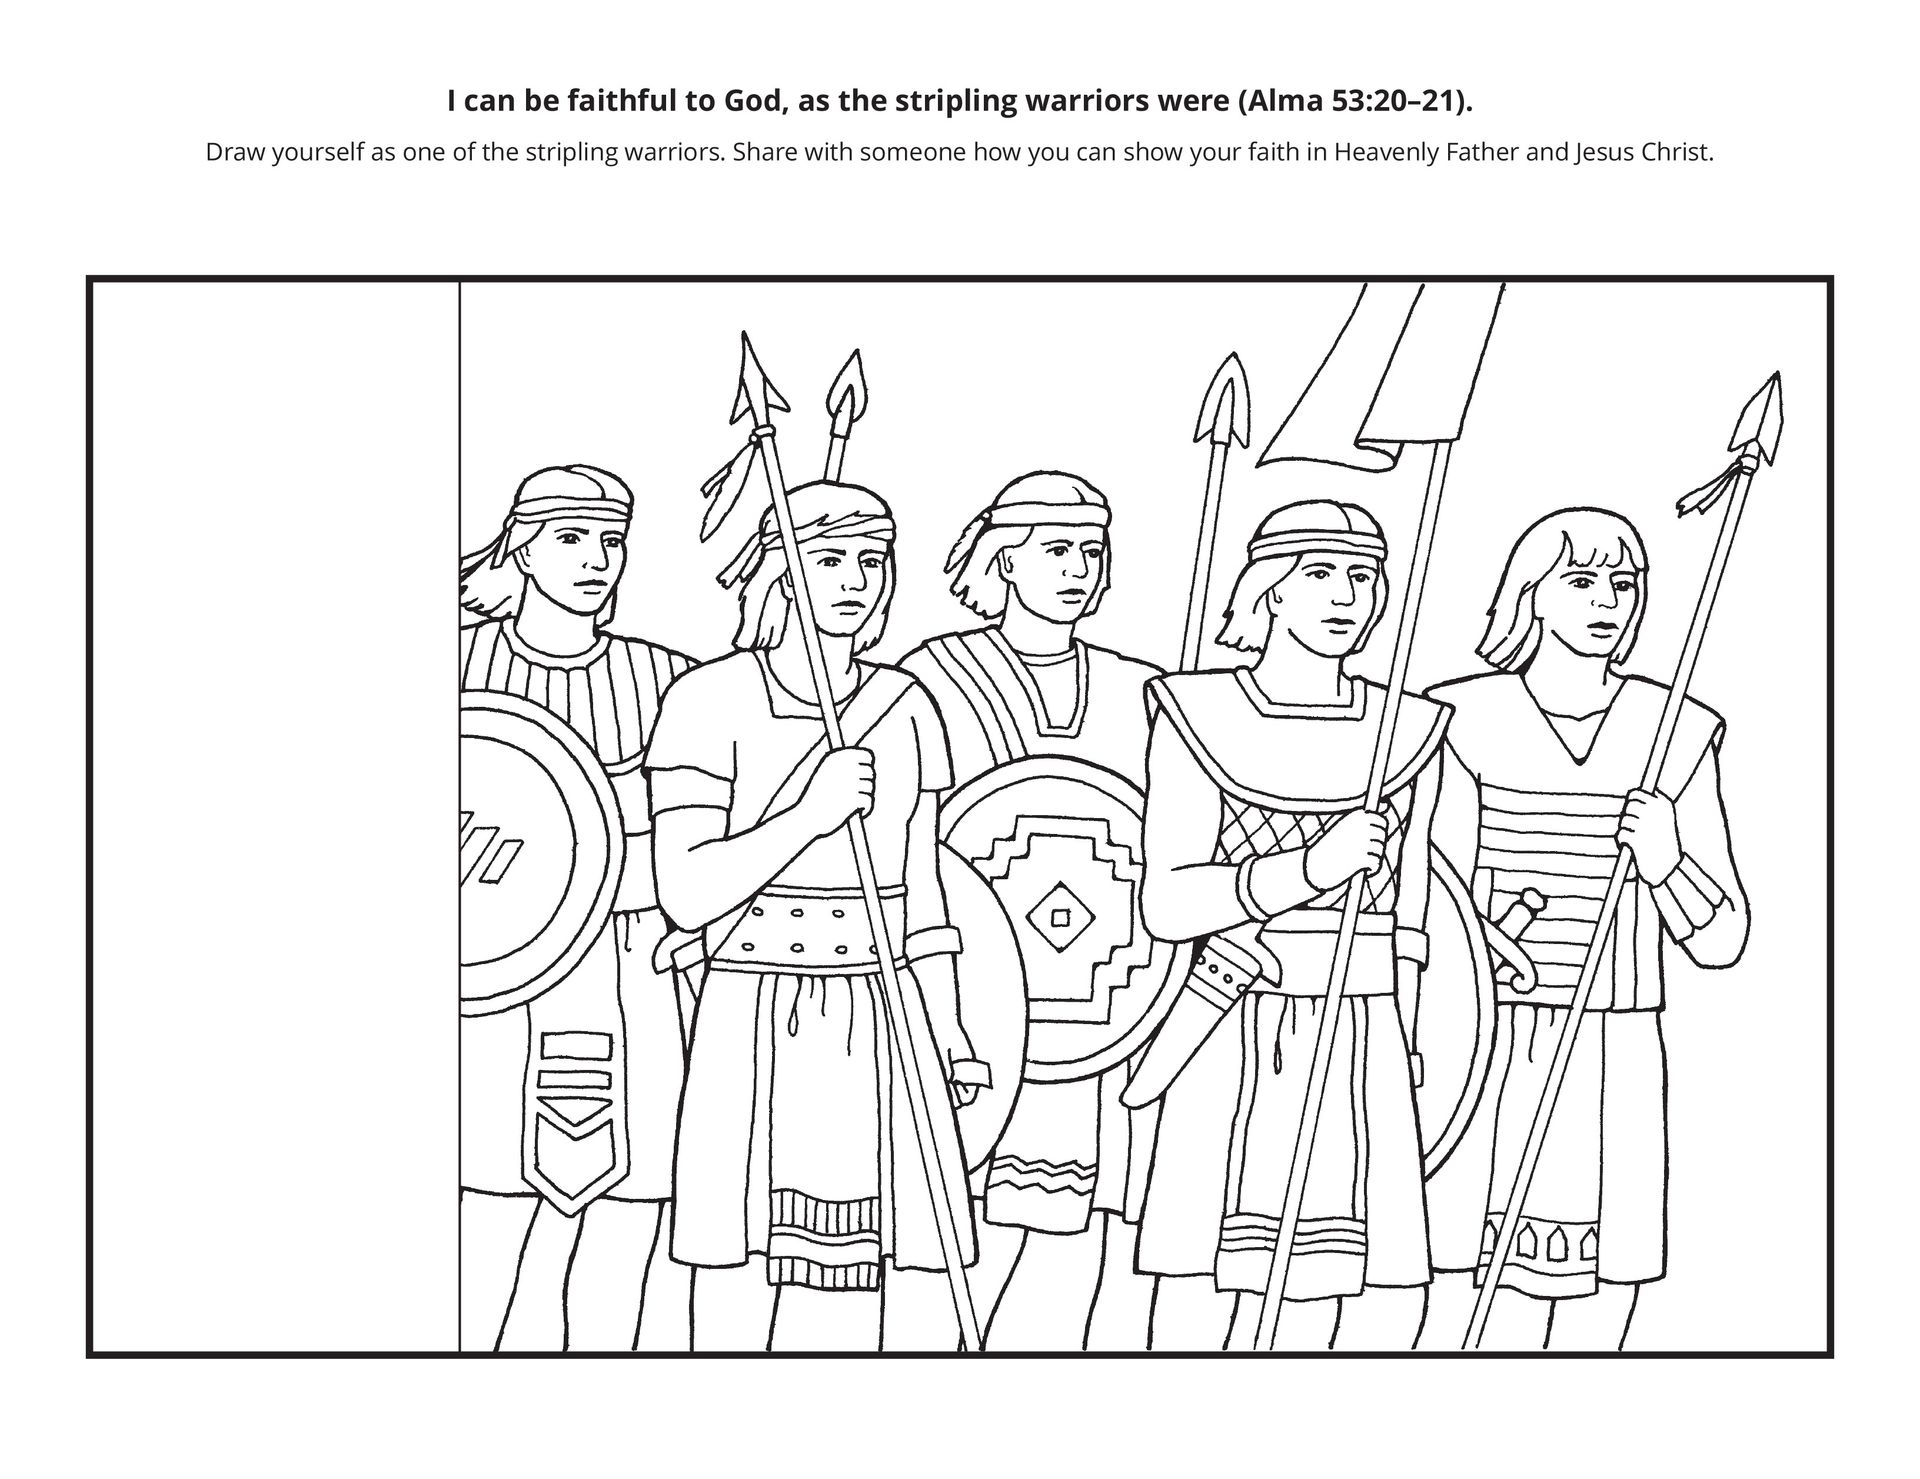 A line-art drawing of the stripling warriors.